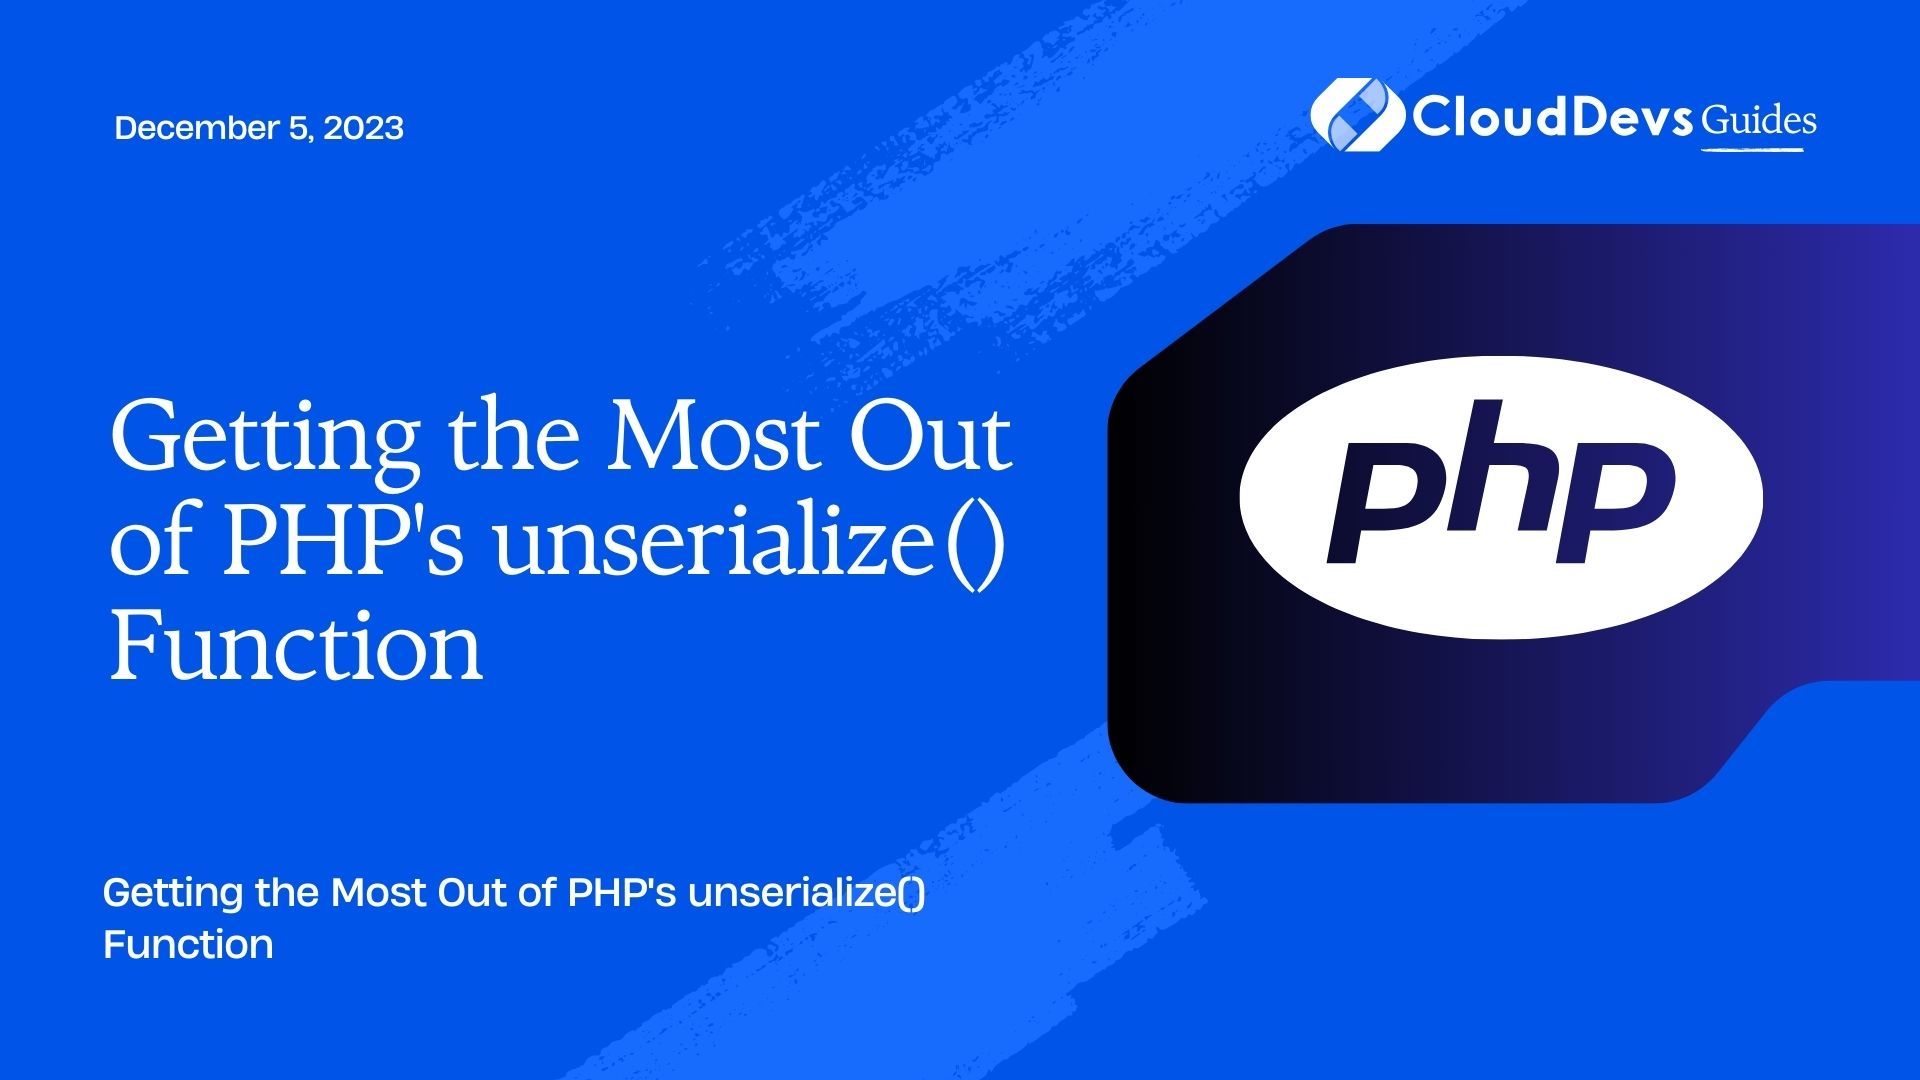 Getting the Most Out of PHP's unserialize() Function